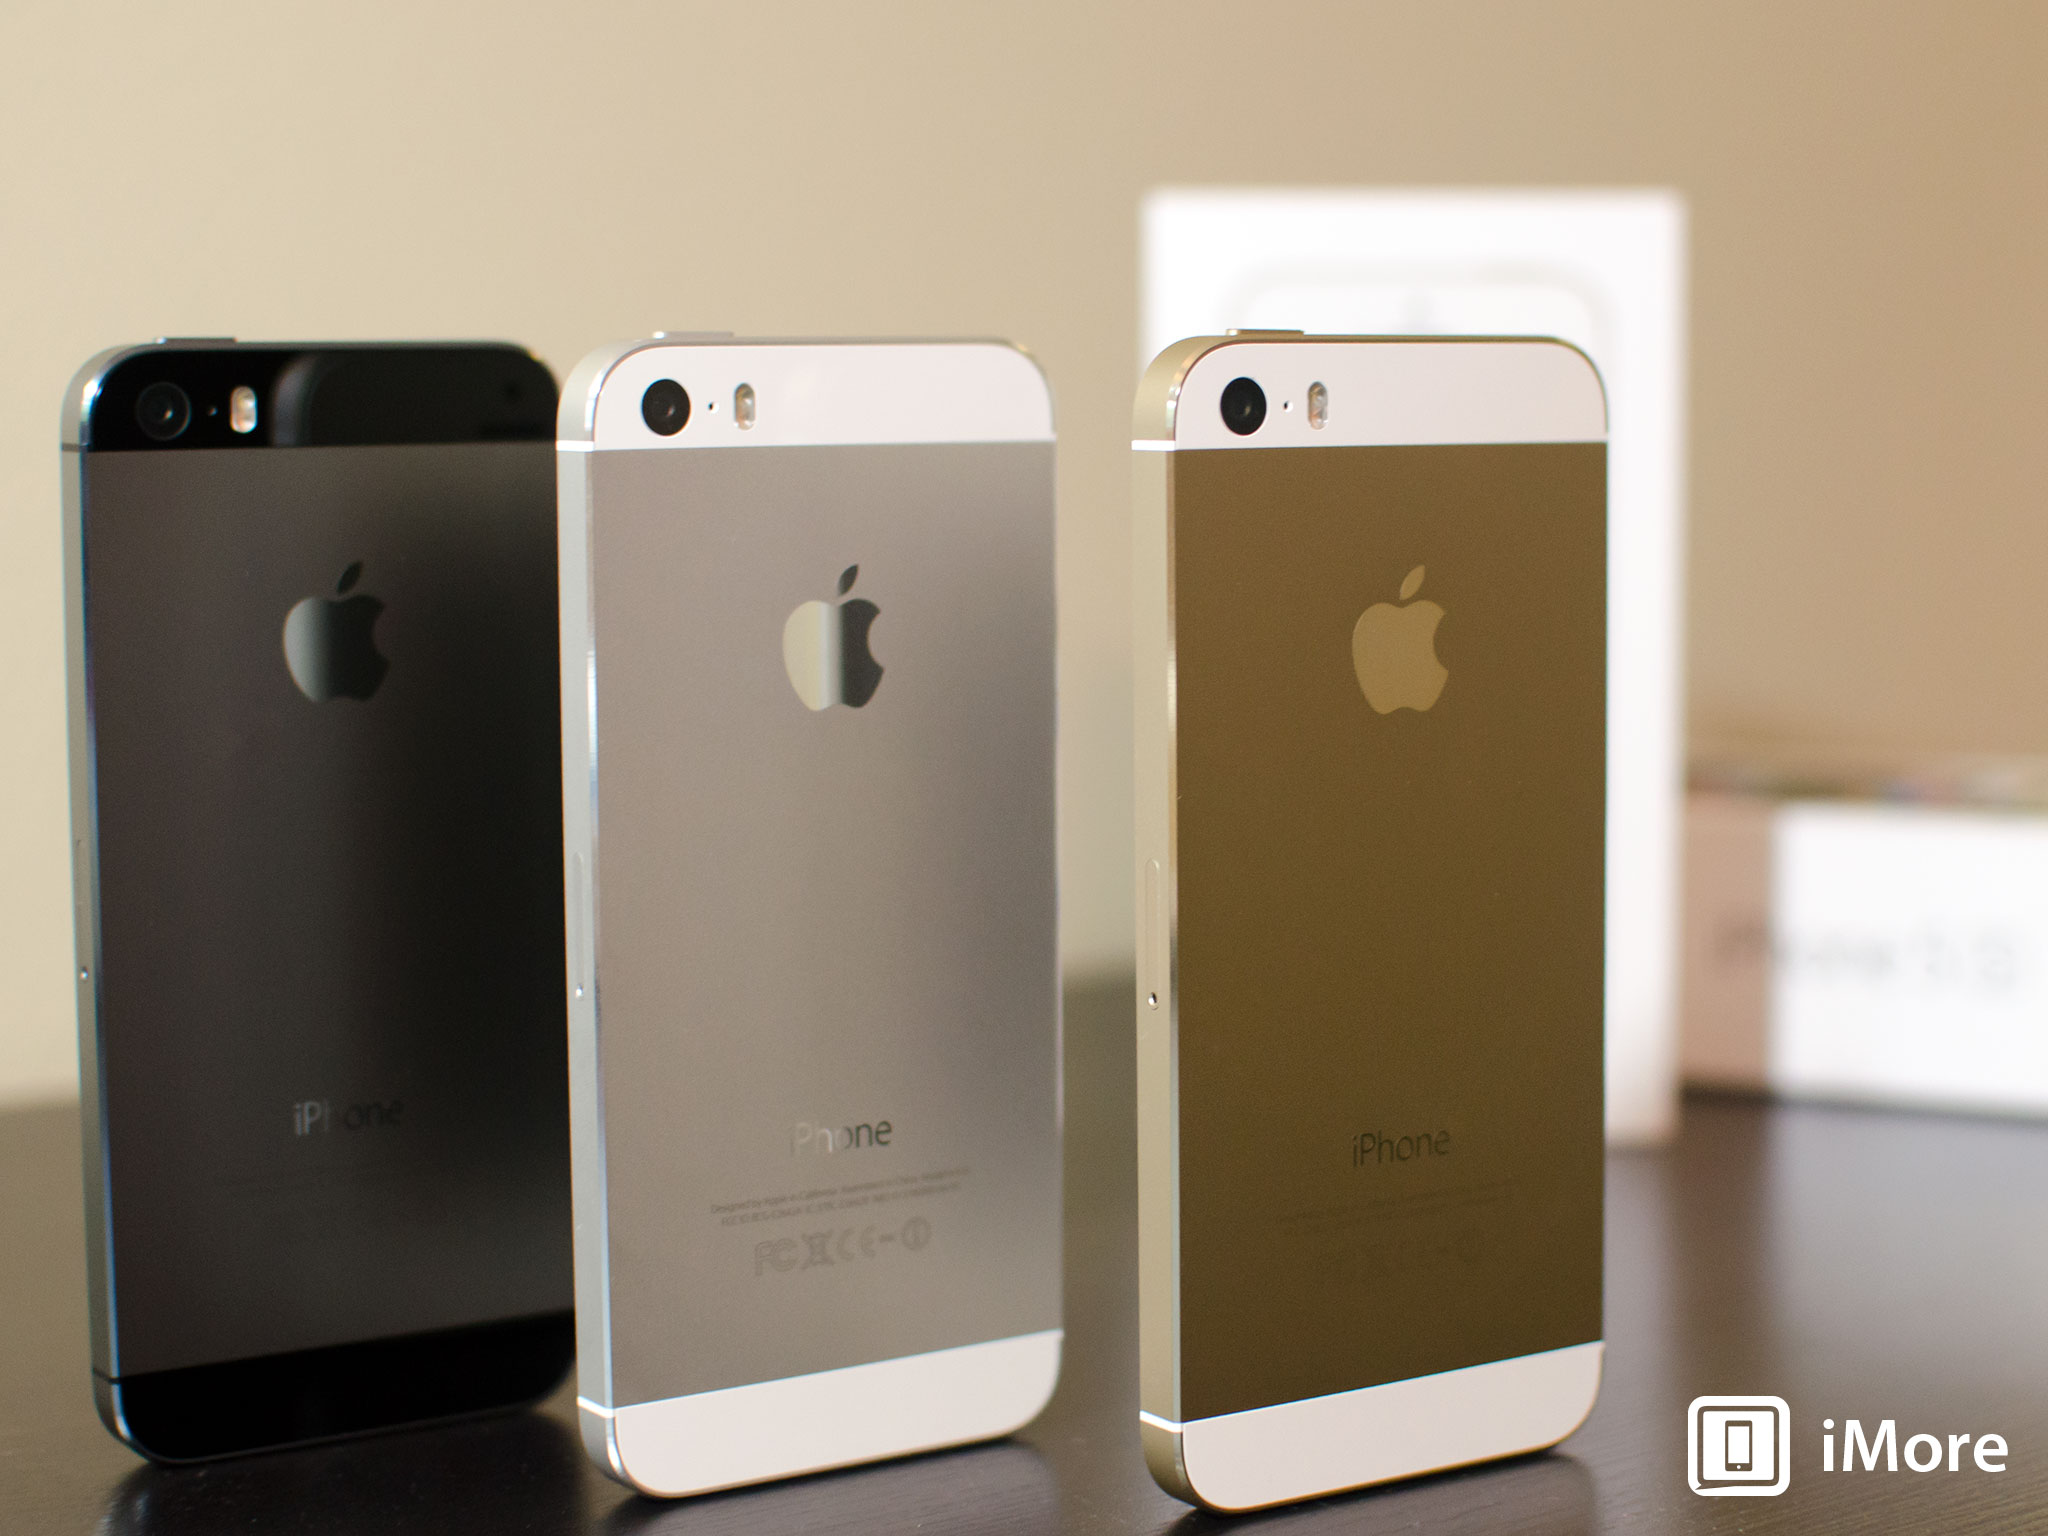 Zonnebrand Dor kaart iPhone 5s photo comparison: Gold, Silver, and Space Gray! | iMore